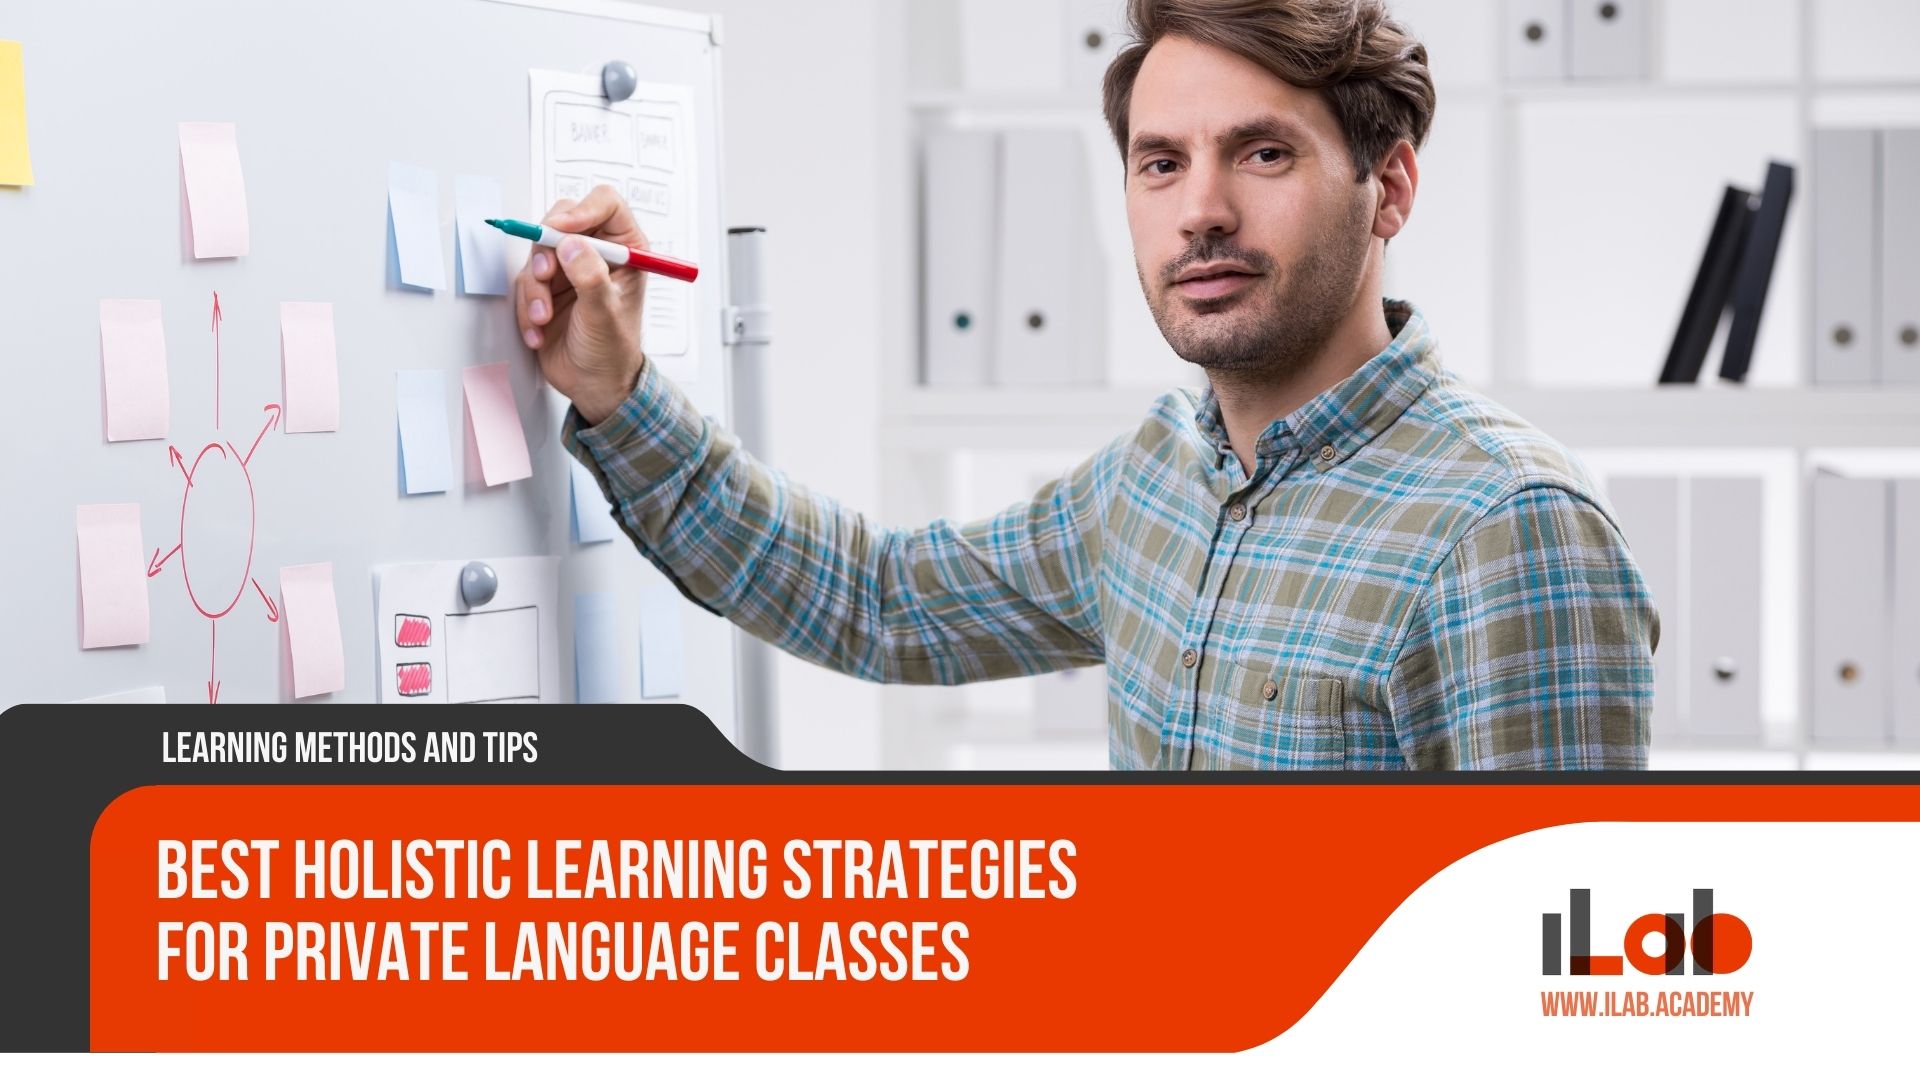 Best Holistic Learning Strategies for Private Language Classes